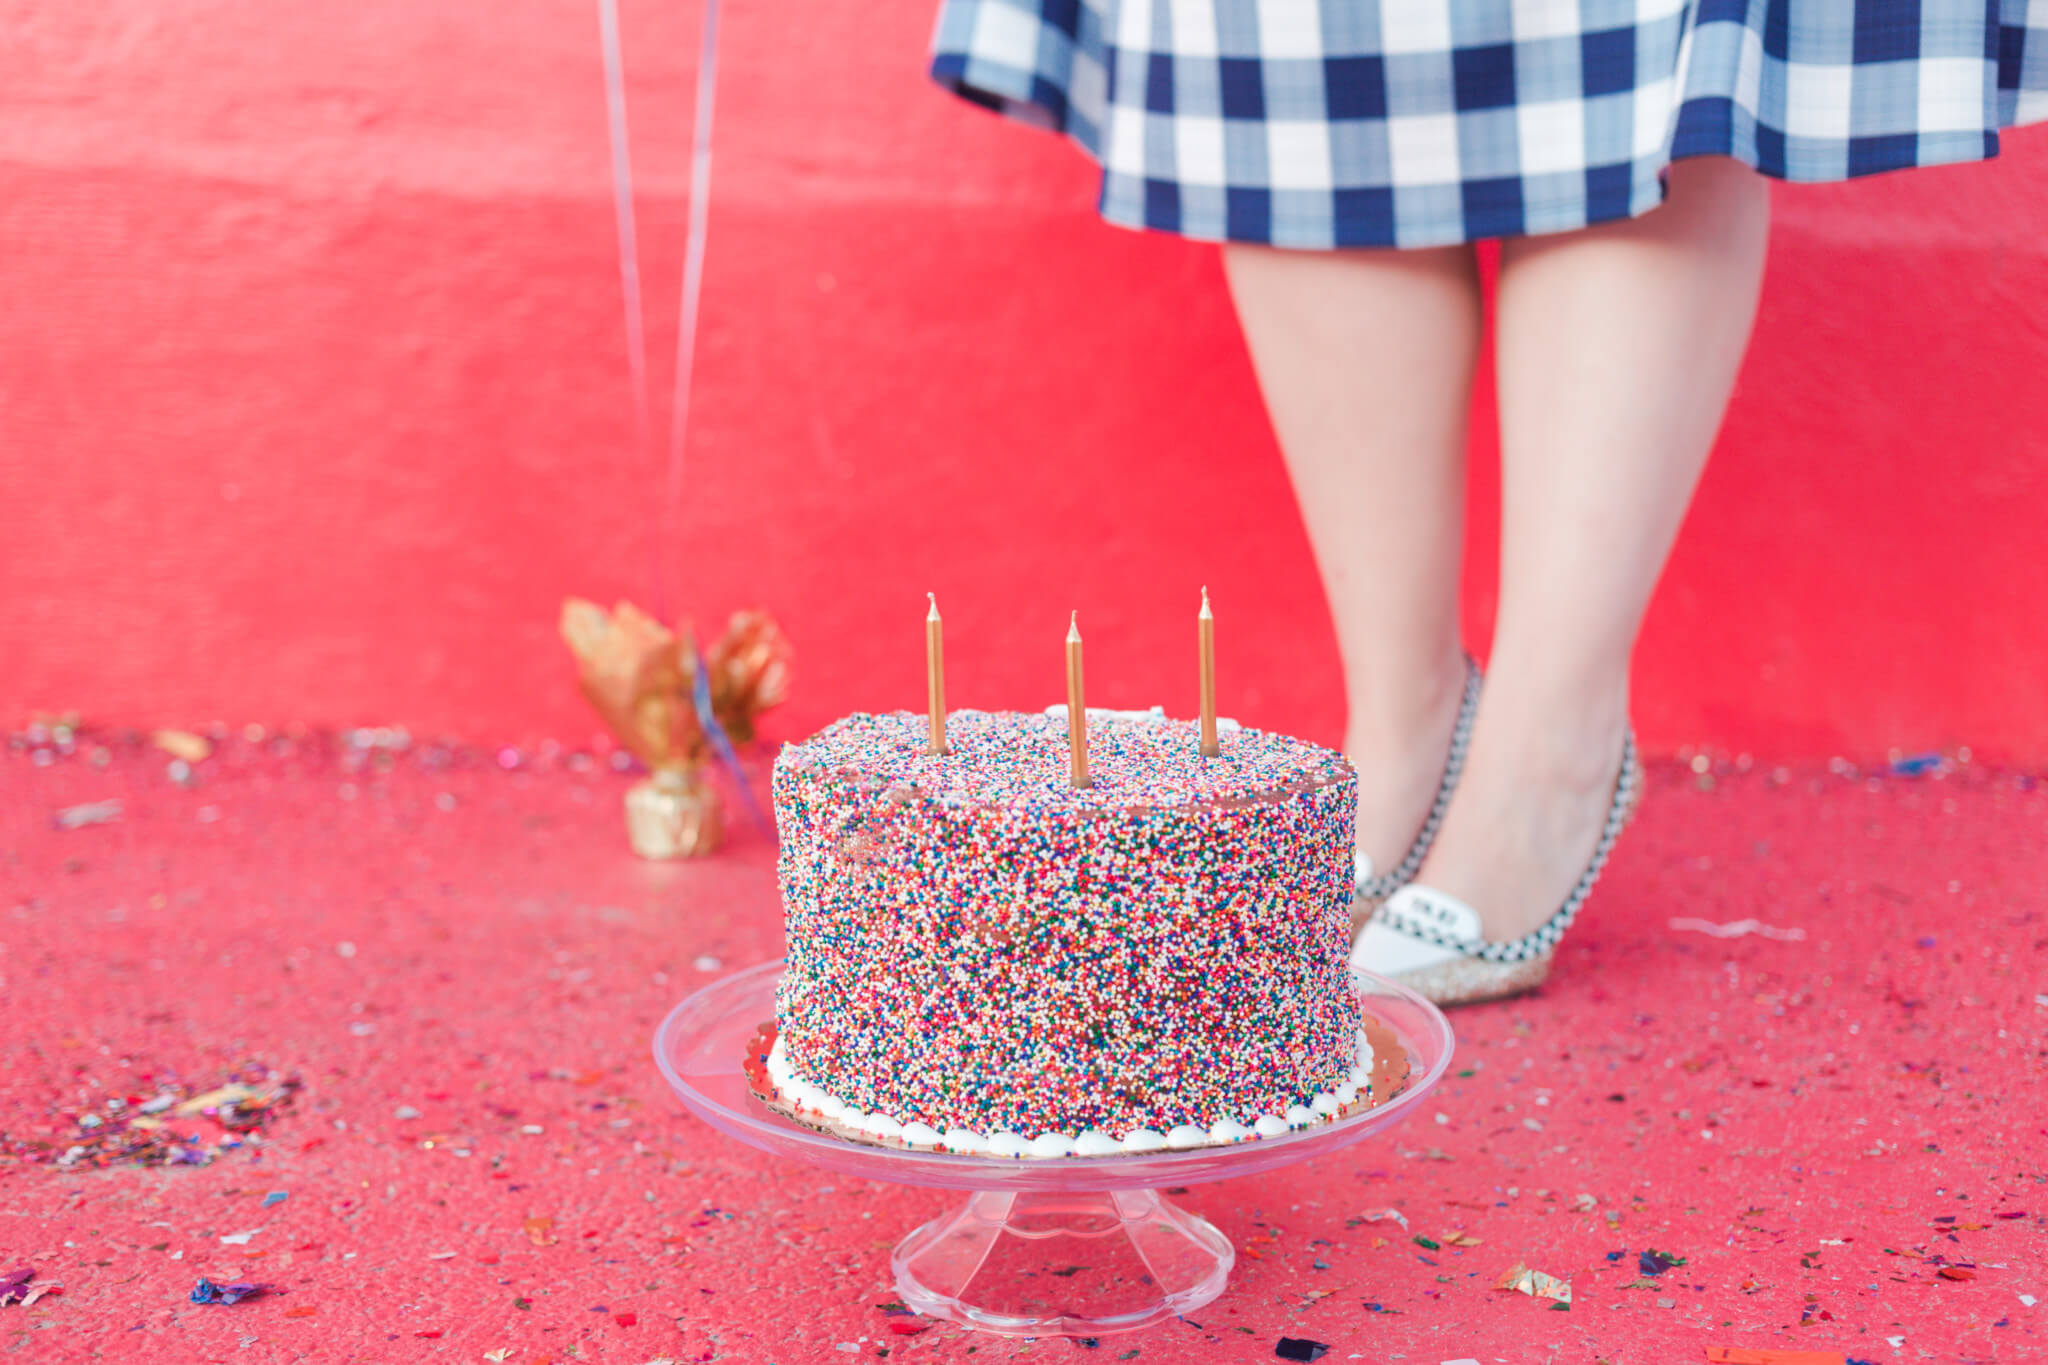 Kate Spade Lexi Taxi Heels are the perfect heels to celebrate my third year of blogging! | Something Gold, Something Blue a curvy fashion blog by Emily Bastedo